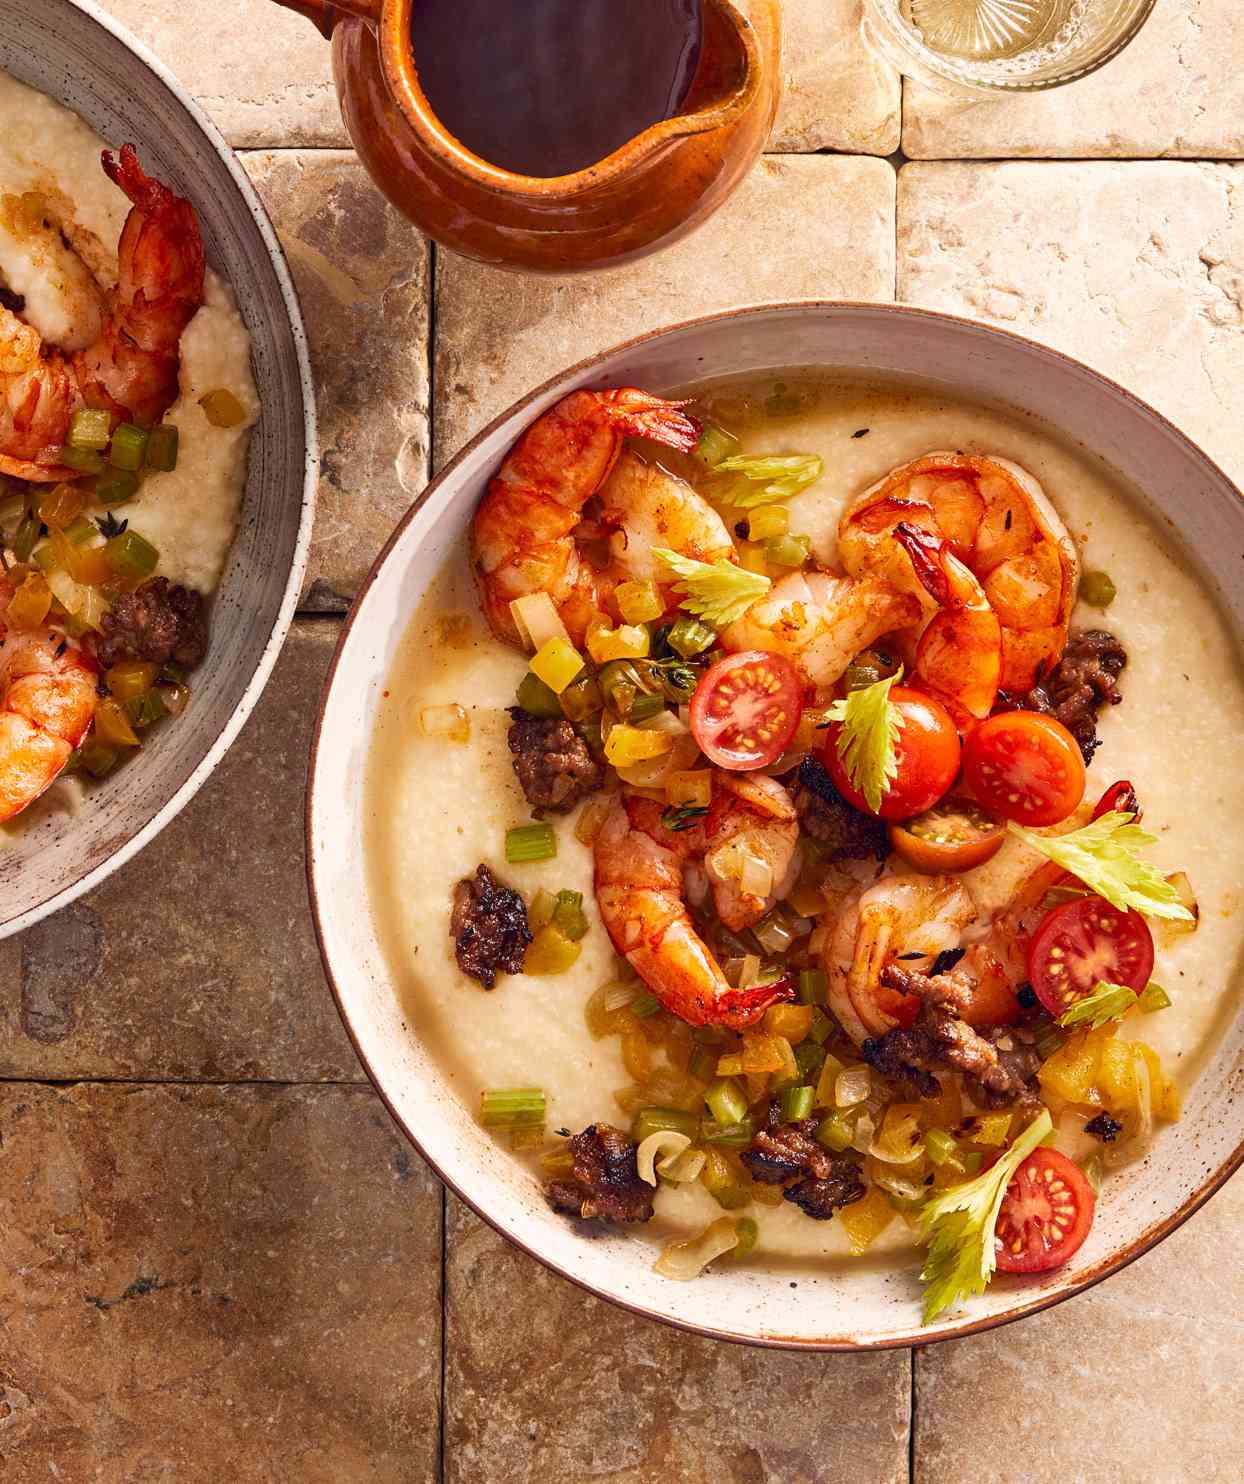 Shrimp and Cheesy Grits